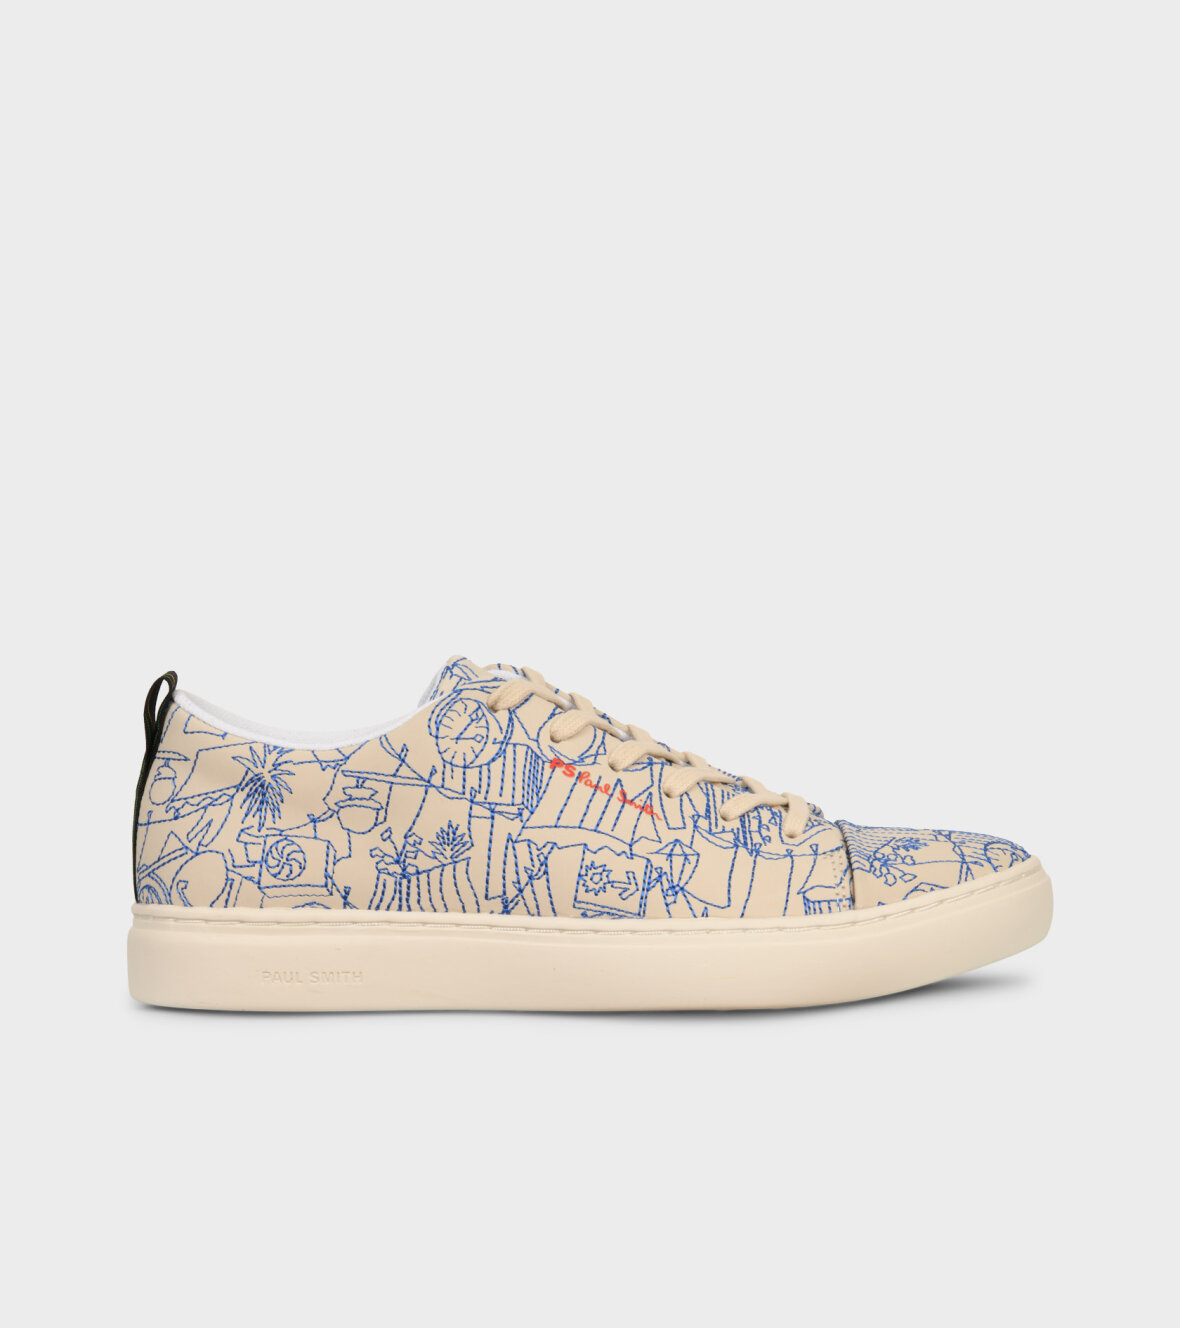 Flad stum flyde dr. Adams - Paul Smith Lee Embroidered Sneakers Light Beige/Blue